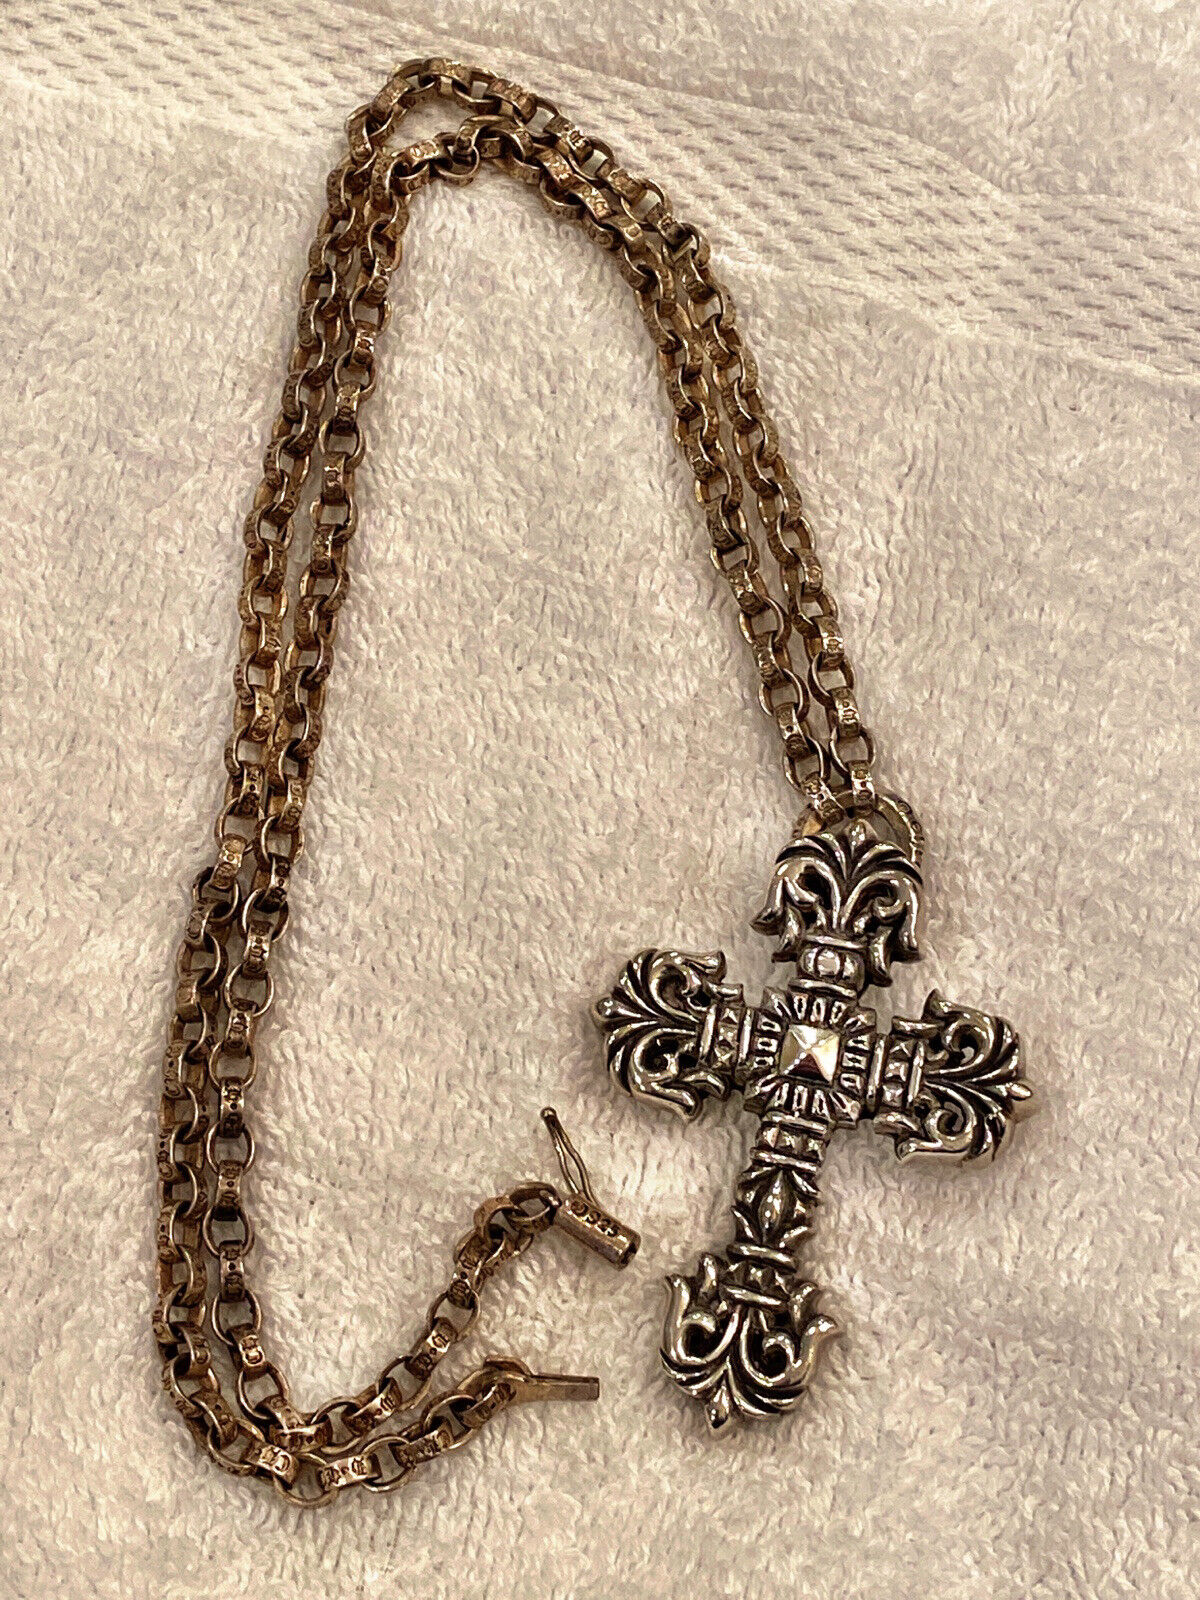 Chrome Hearts Necklace Sterling Cross w/ Logo Chain Ornate 1991 — 86 Grams